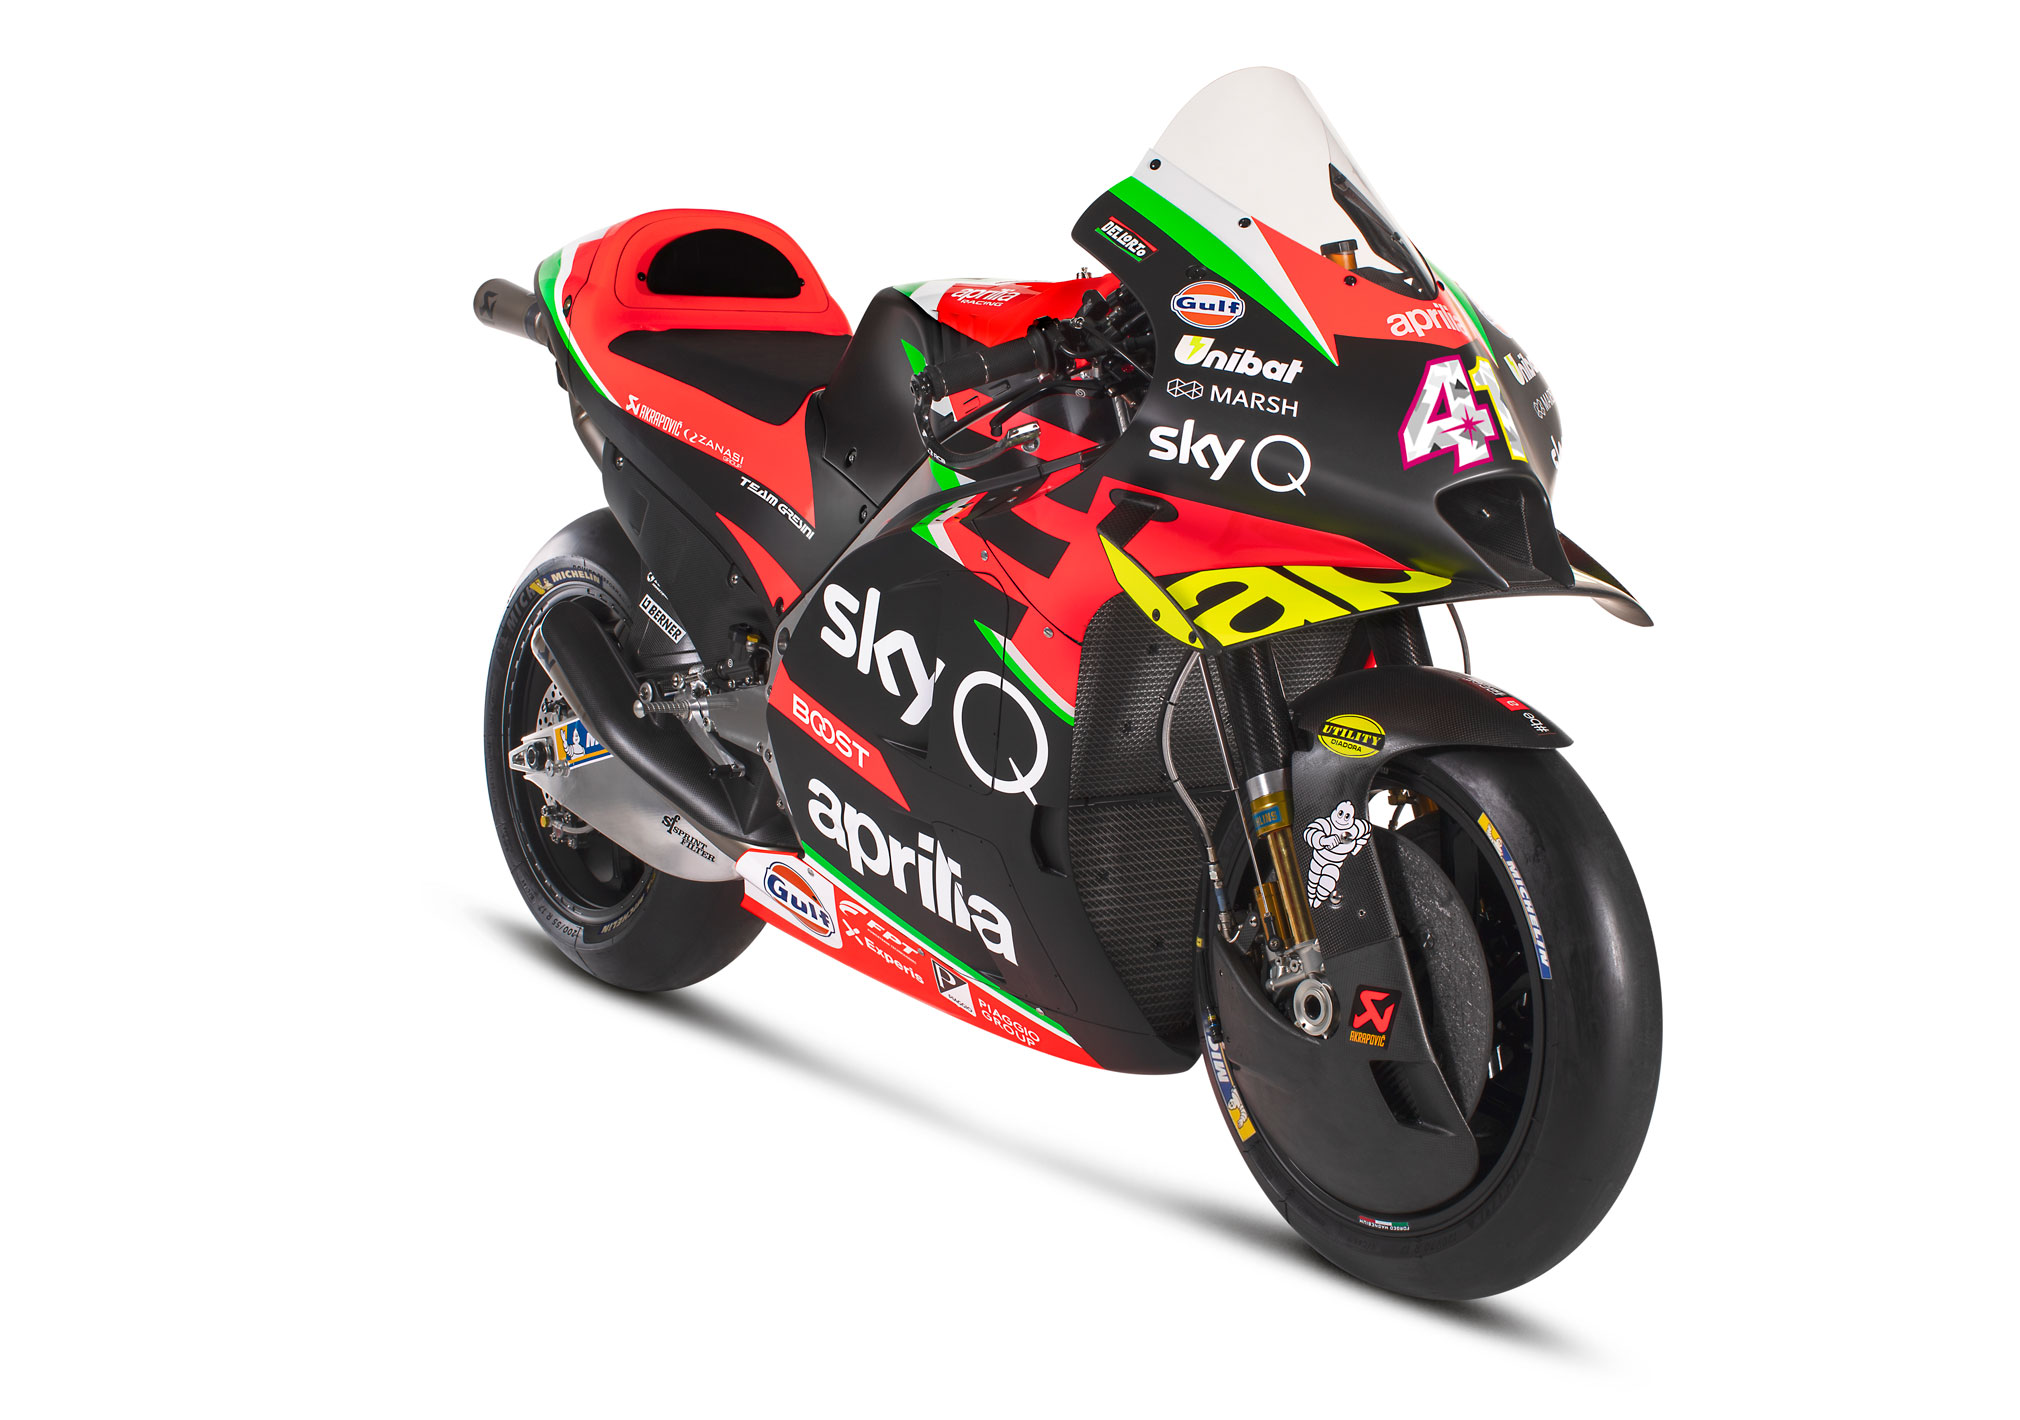 New 2020 Aprilia RS-GP MotoGP Bike Launched with V90 Engine • Total